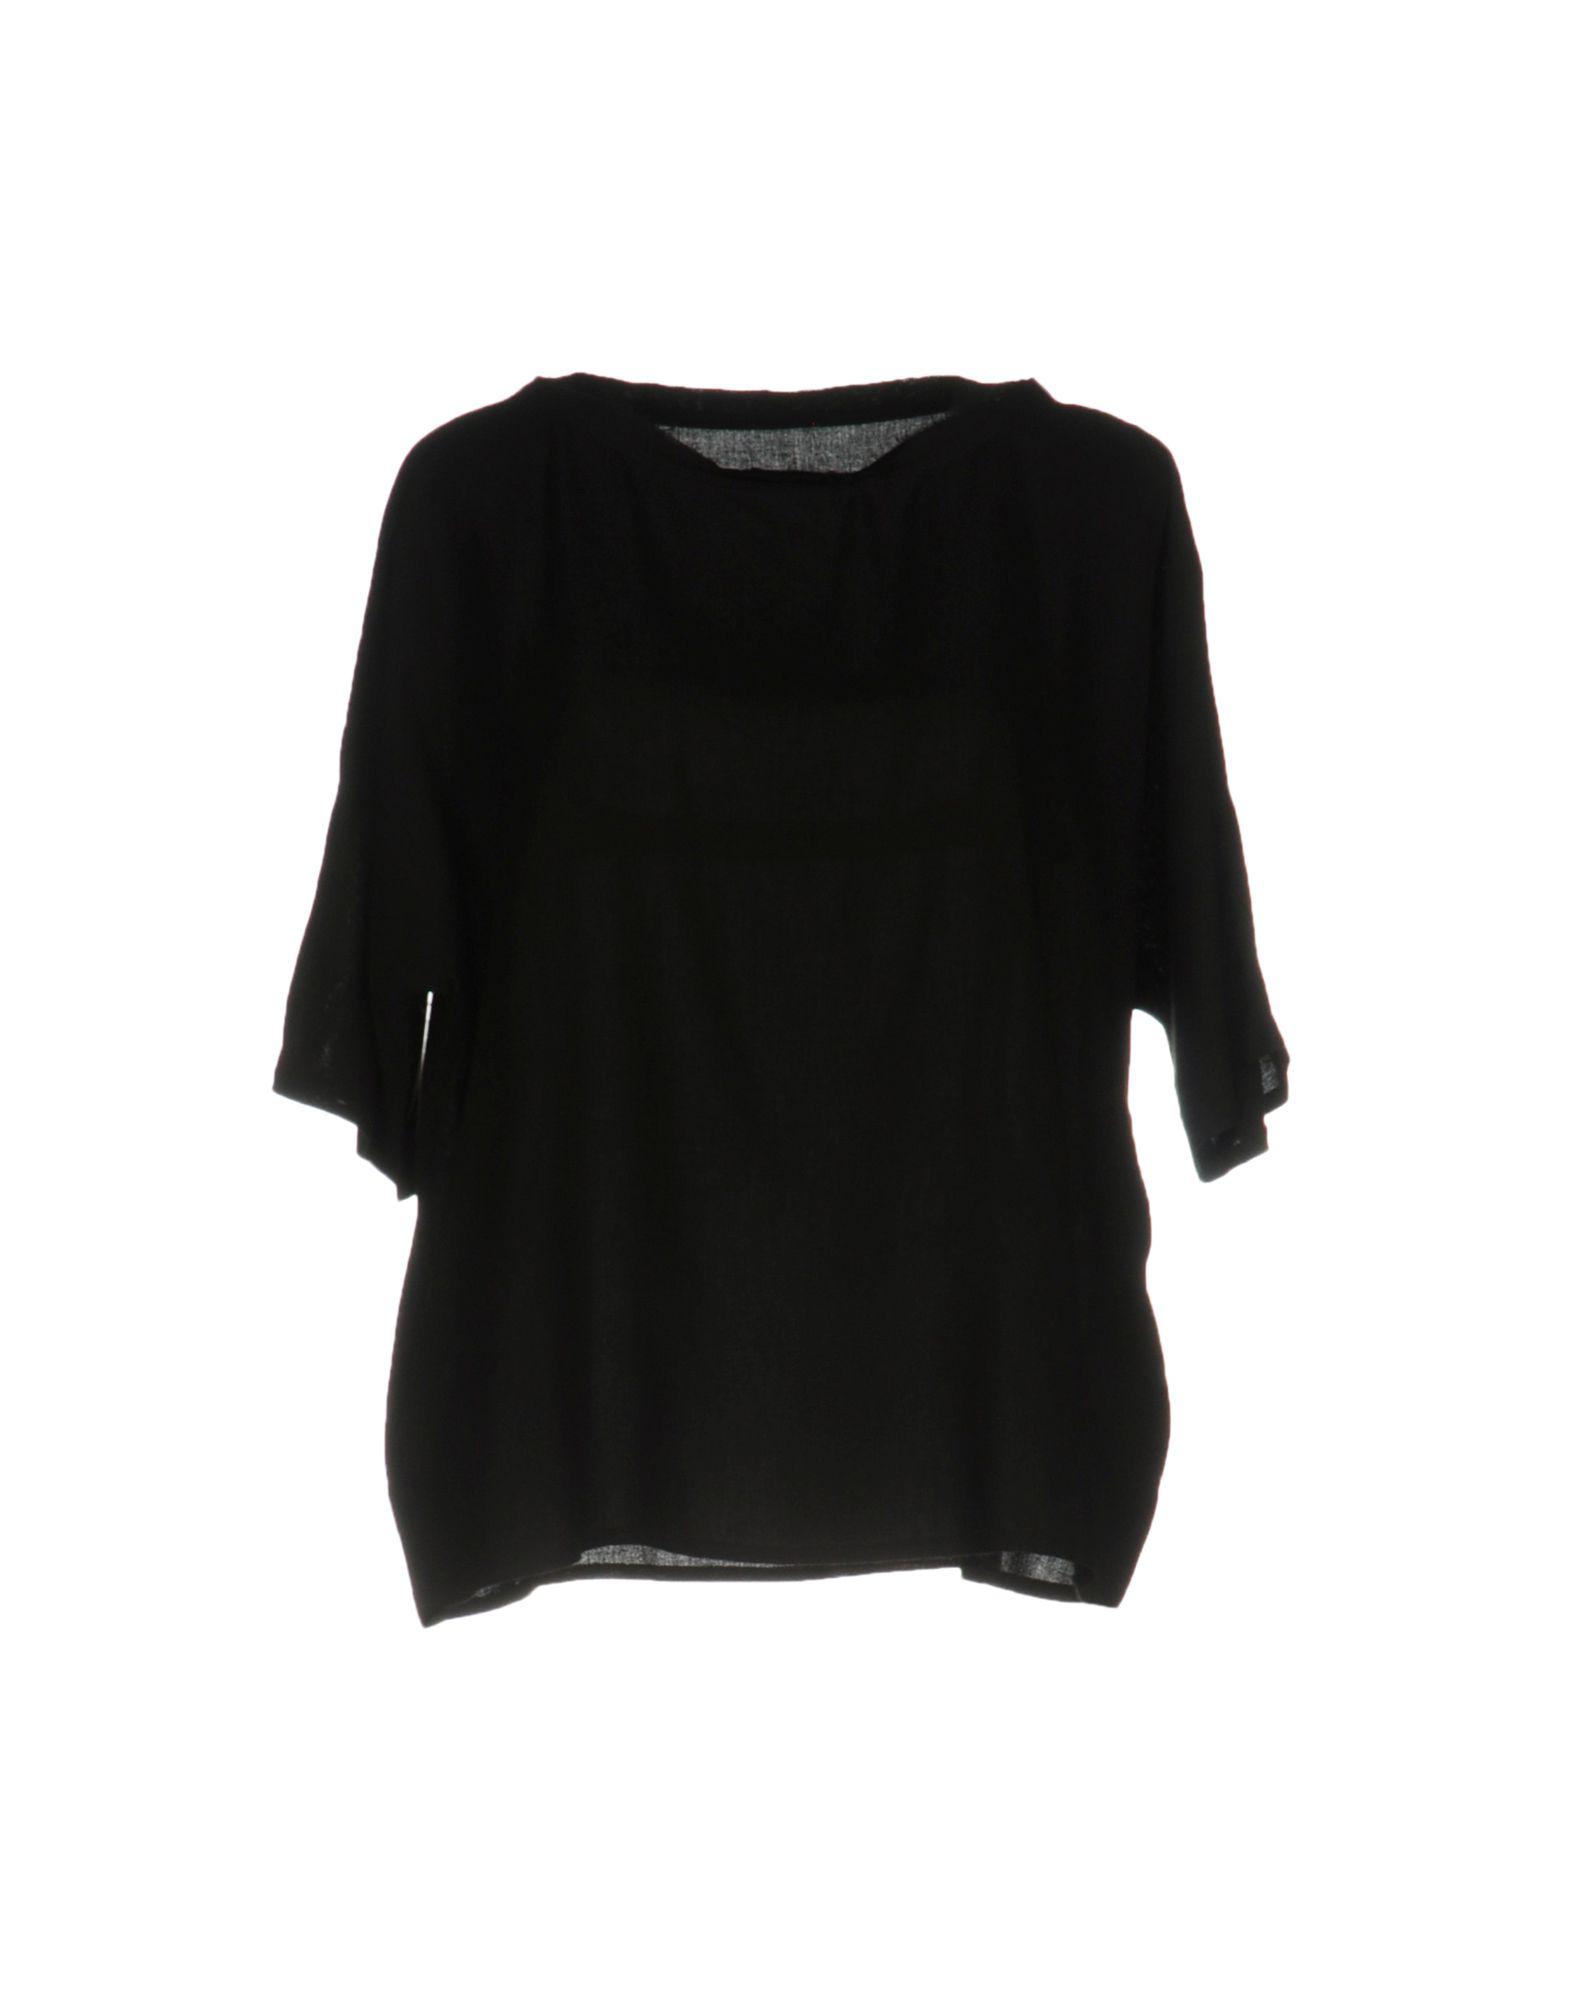 MM6 by Maison Martin Margiela Synthetic Blouse in Black - Lyst